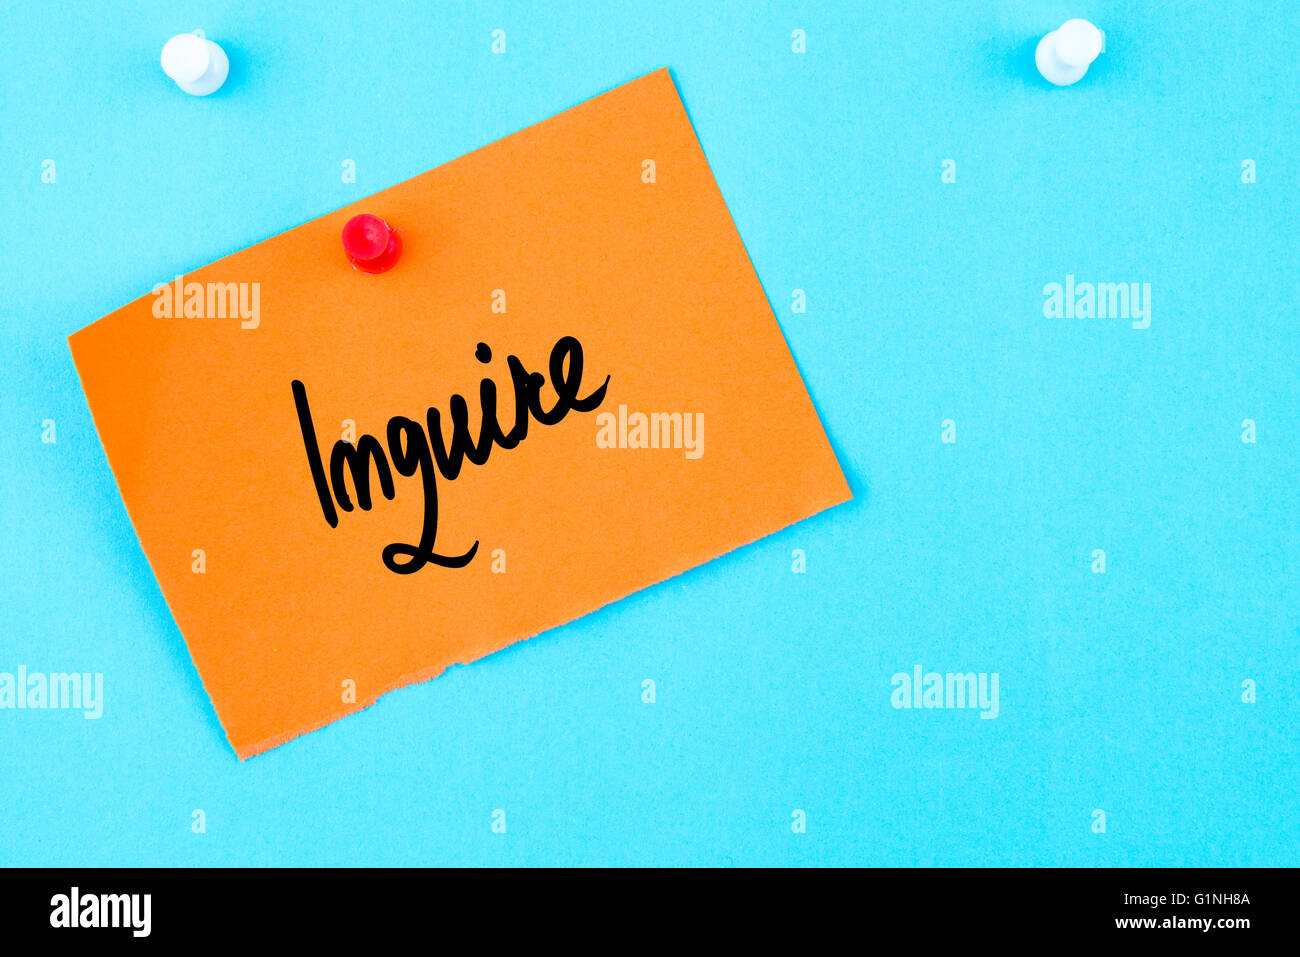 Inquire written on orange paper note pinned on cork board with white thumbtack, copy space available Stock Photo